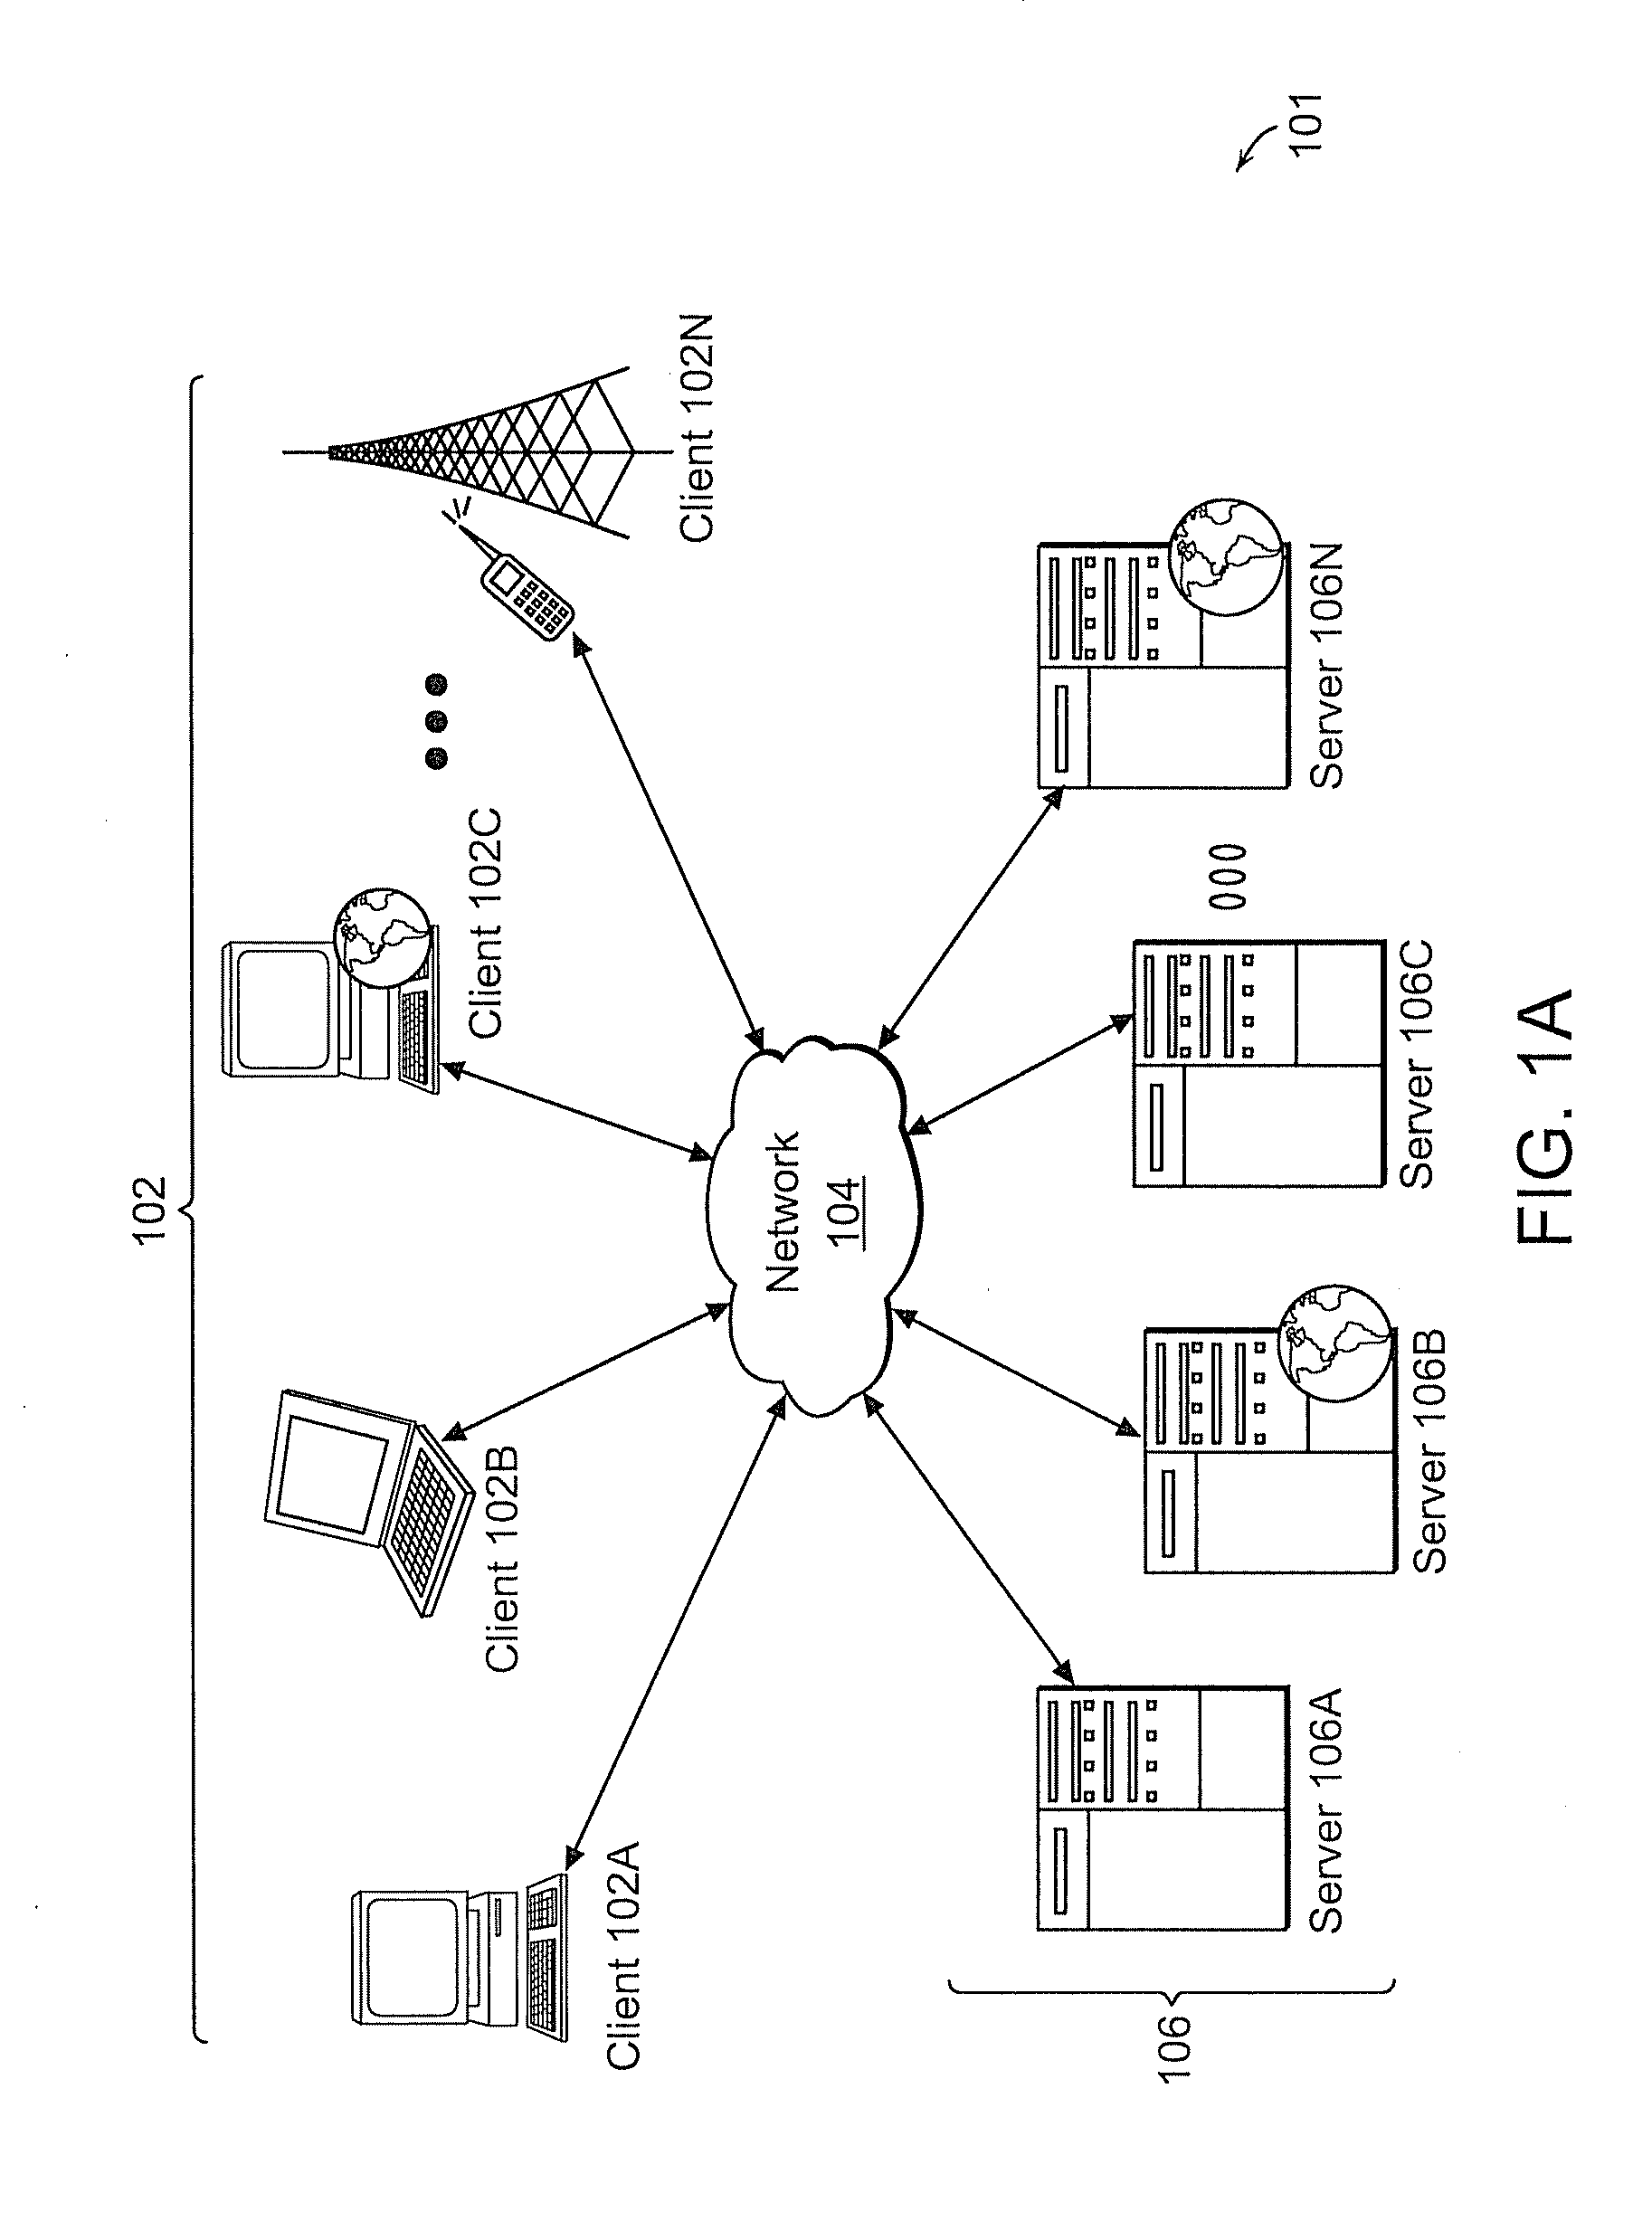 Methods and systems for provisioning a virtual disk to diskless virtual and physical mahcines